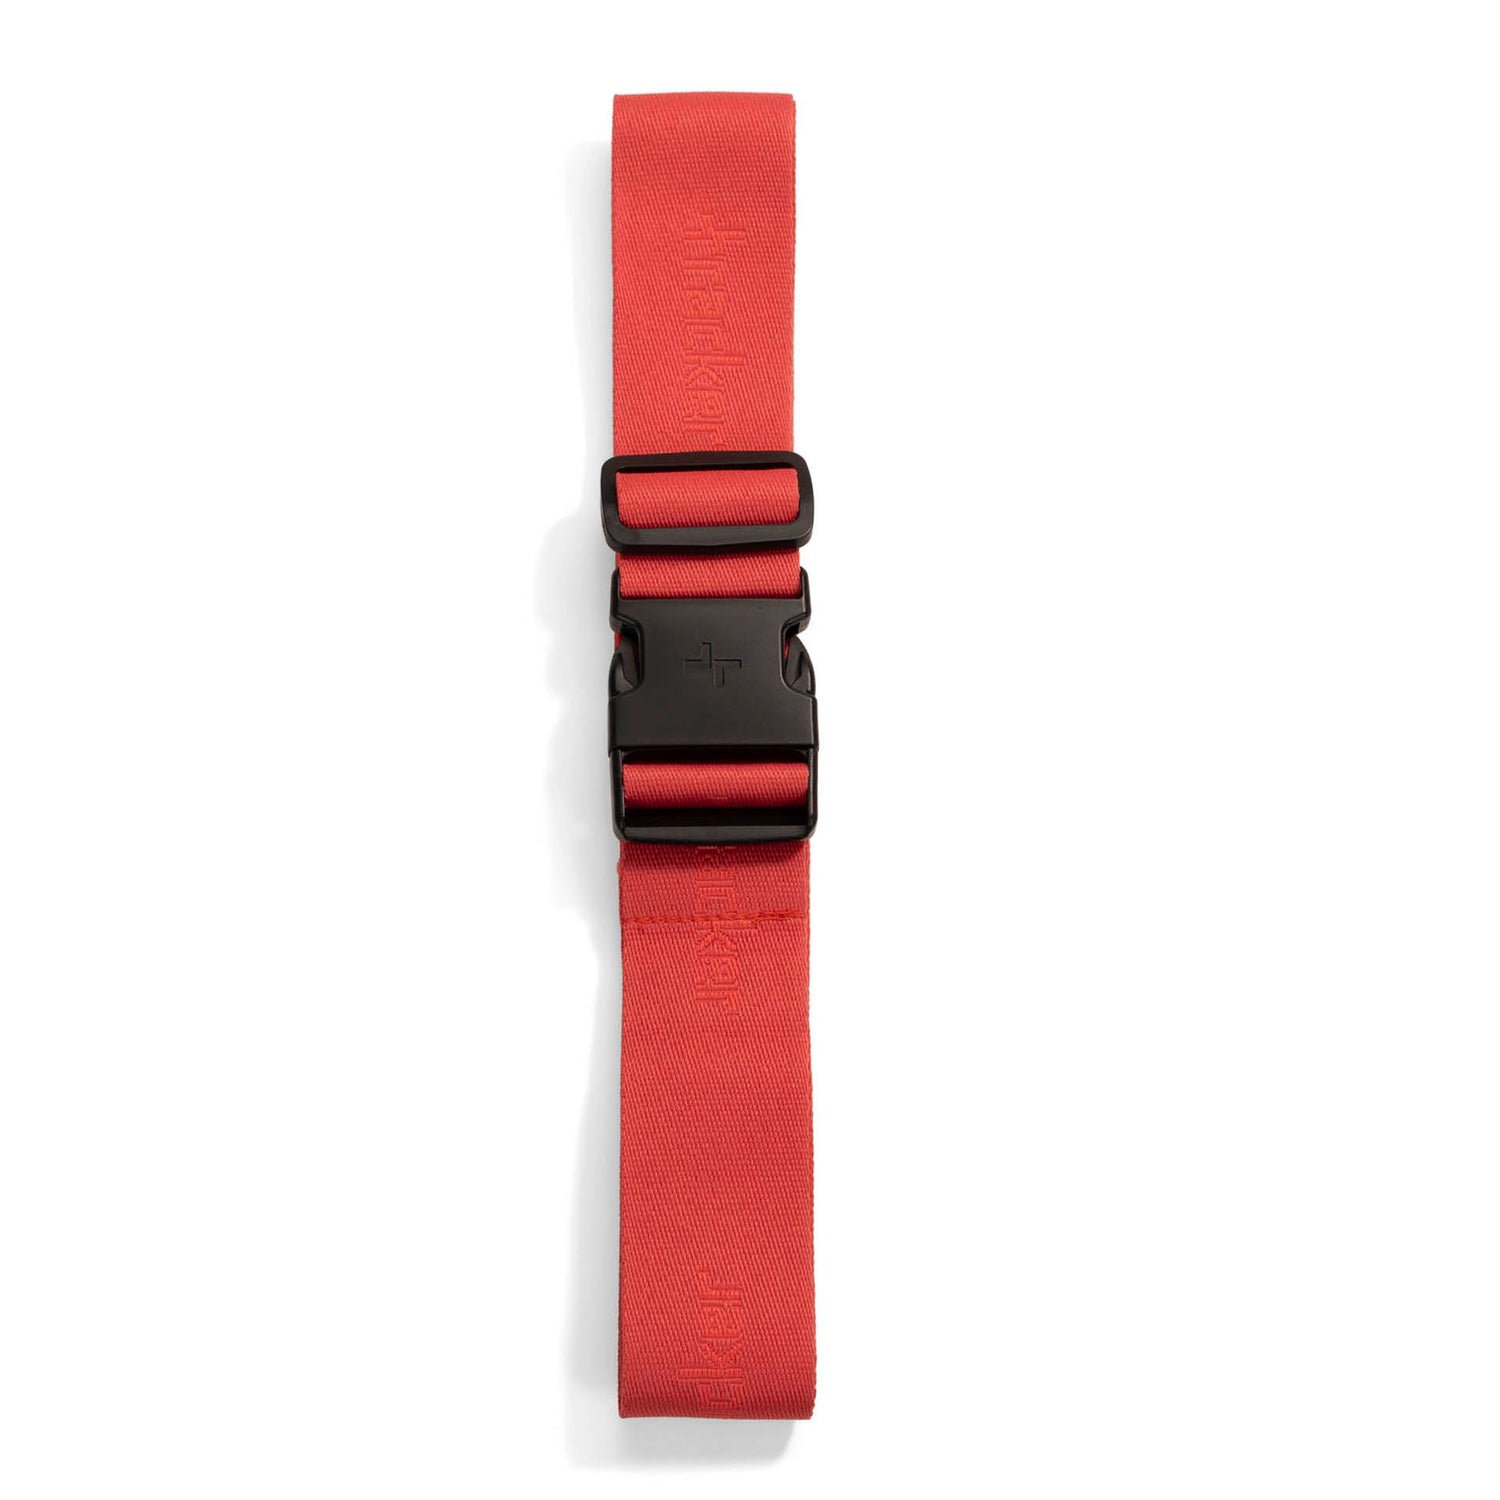 Coral luggage strap designed by Tracker called Tracker Logo folded and buckled showing the tracker logo pattern printed on the entirety of the polyester.